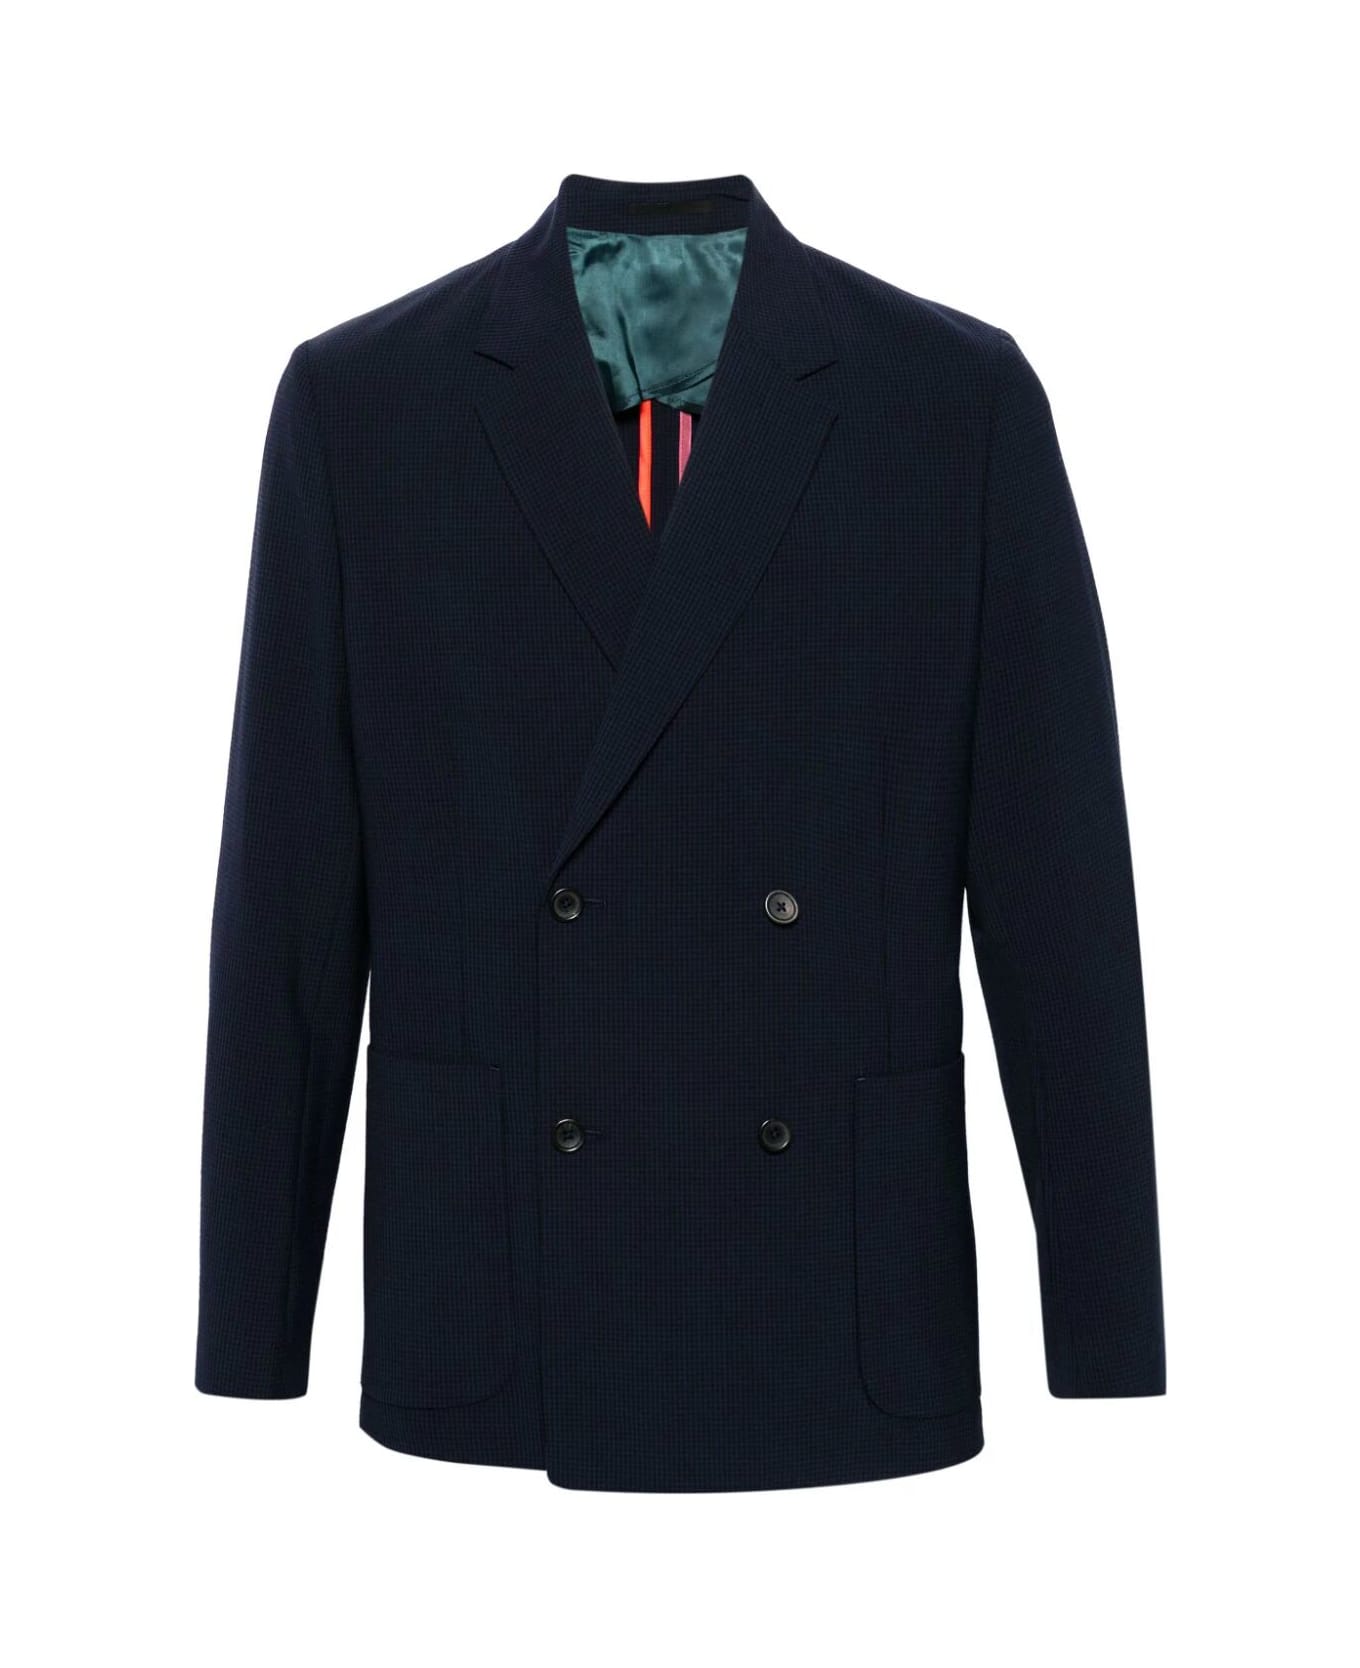 PS by Paul Smith Mens Jacket Double Breasted - Blues